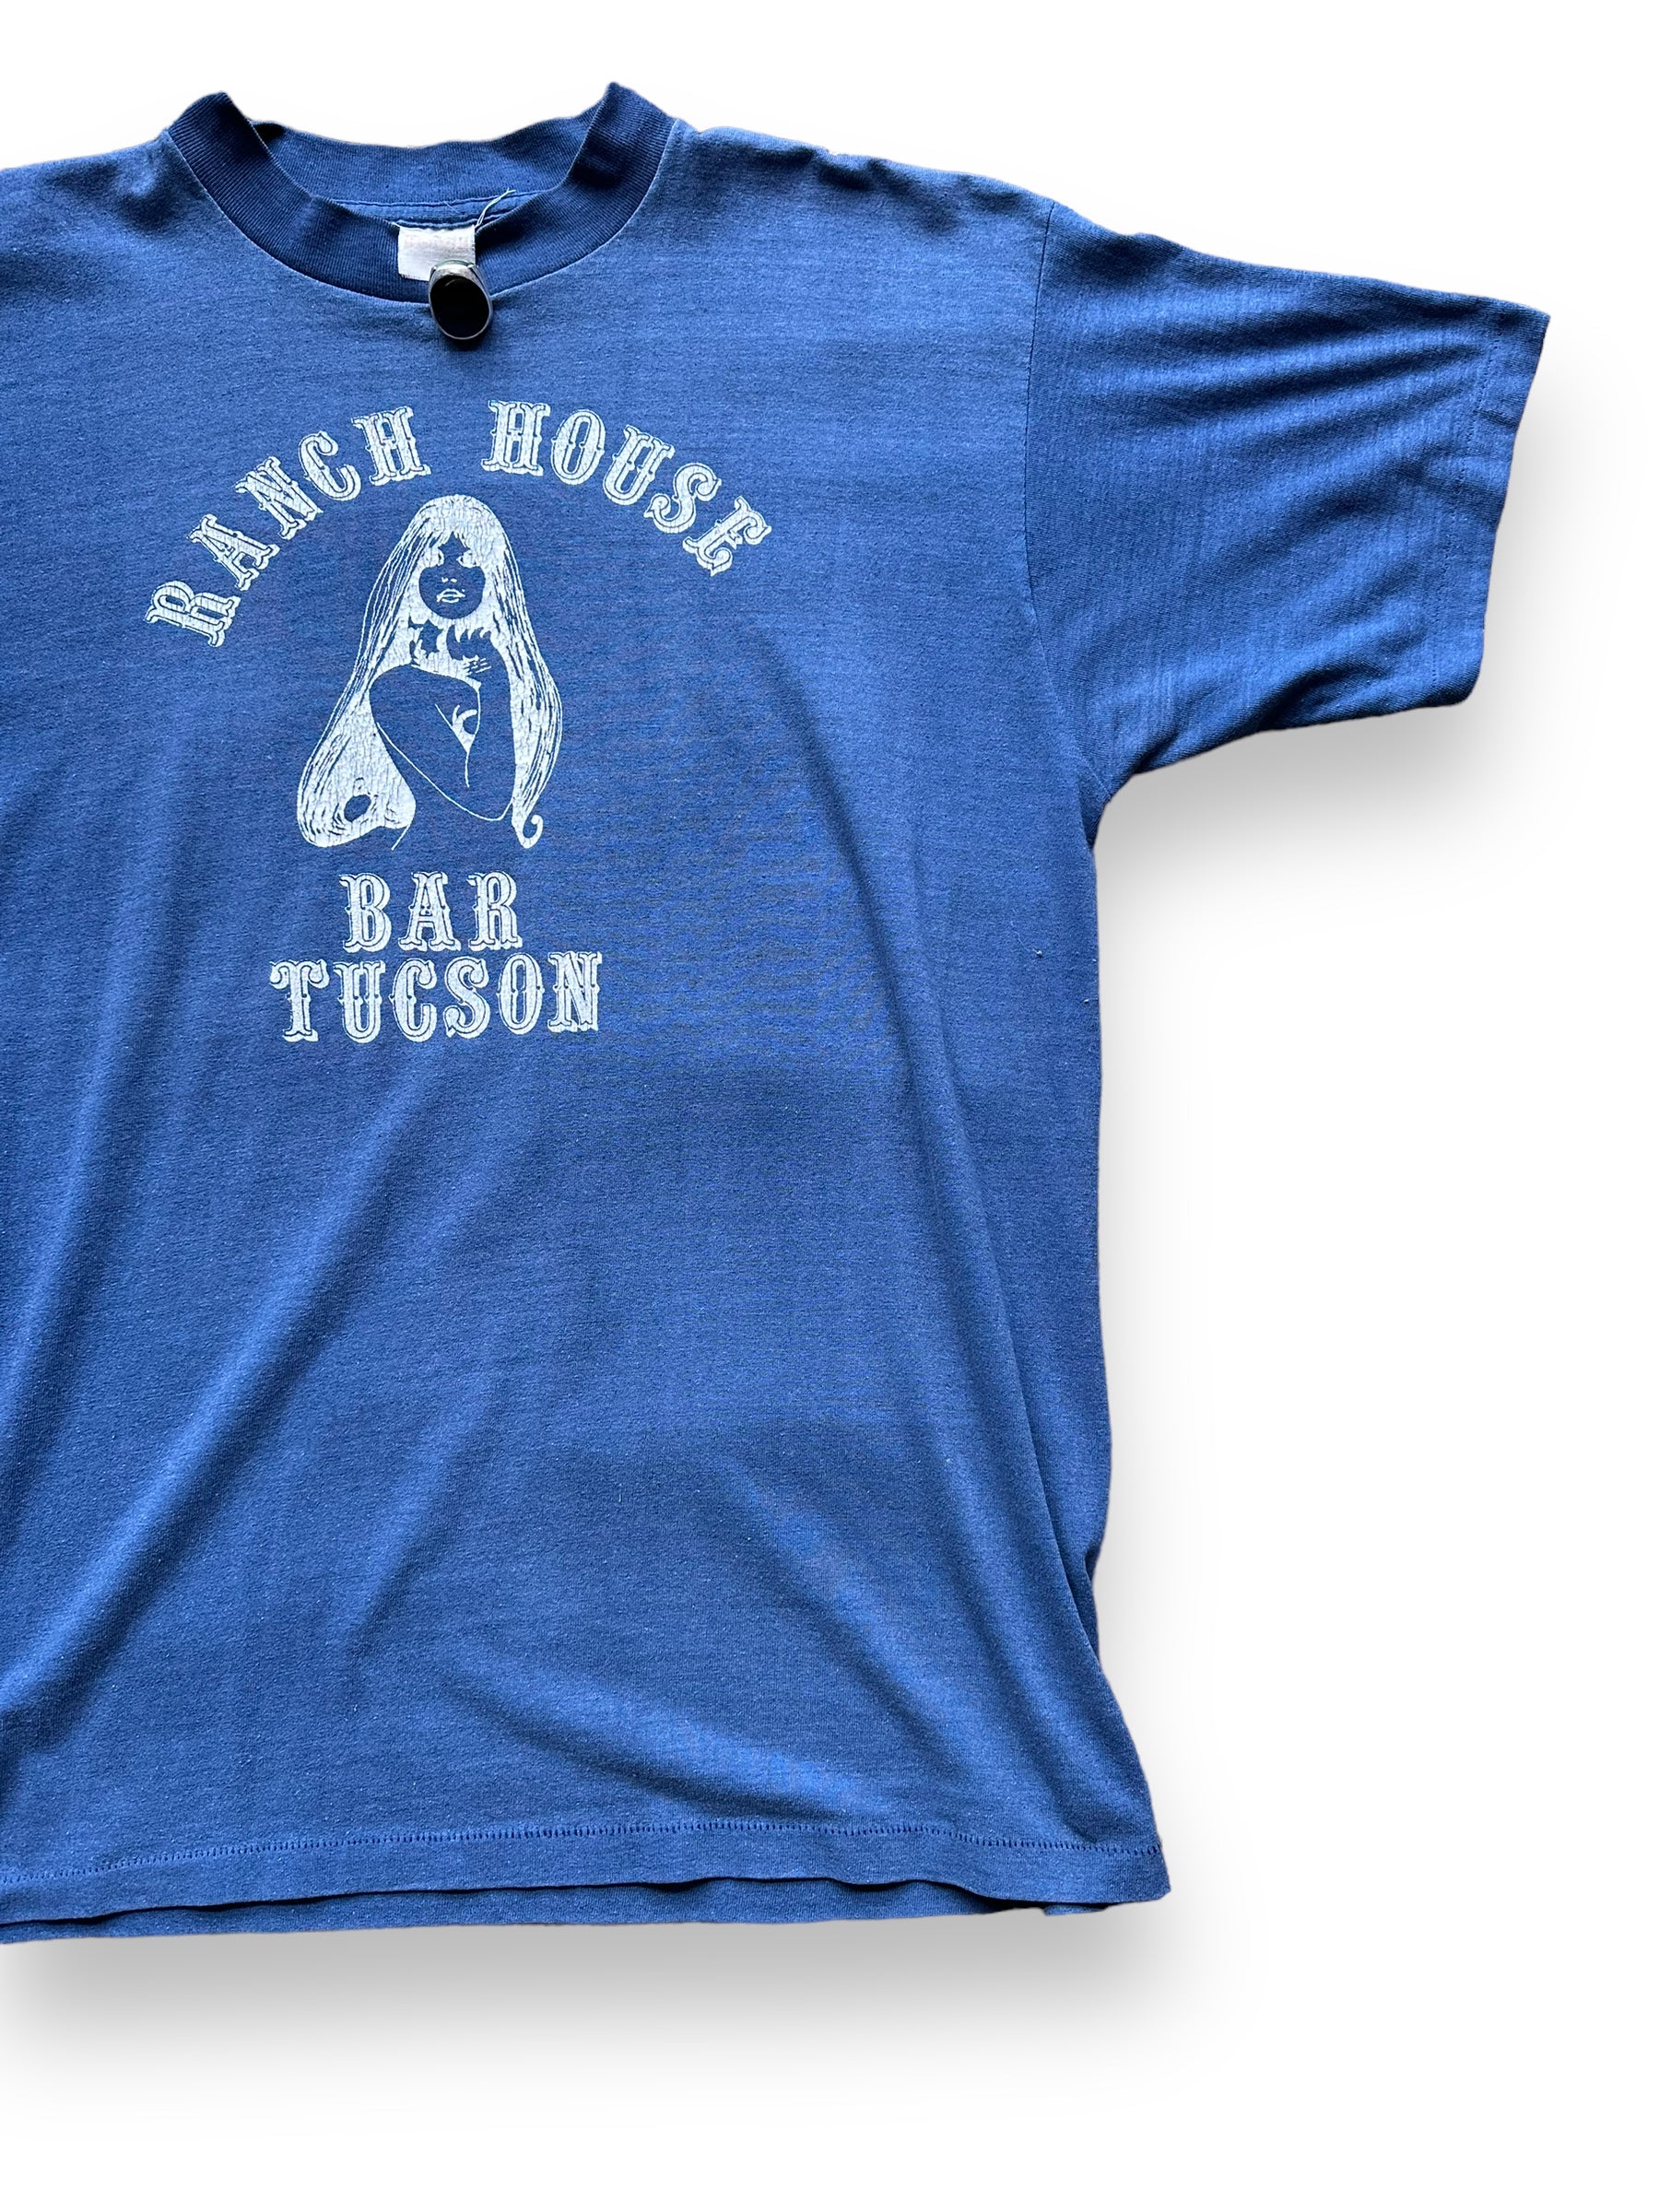 Front Left View of Vintage Ranch House Bar Tucson Tee SZ L | Vintage Nudie Bar T-Shirts Seattle | Barn Owl Vintage Tees Seattle